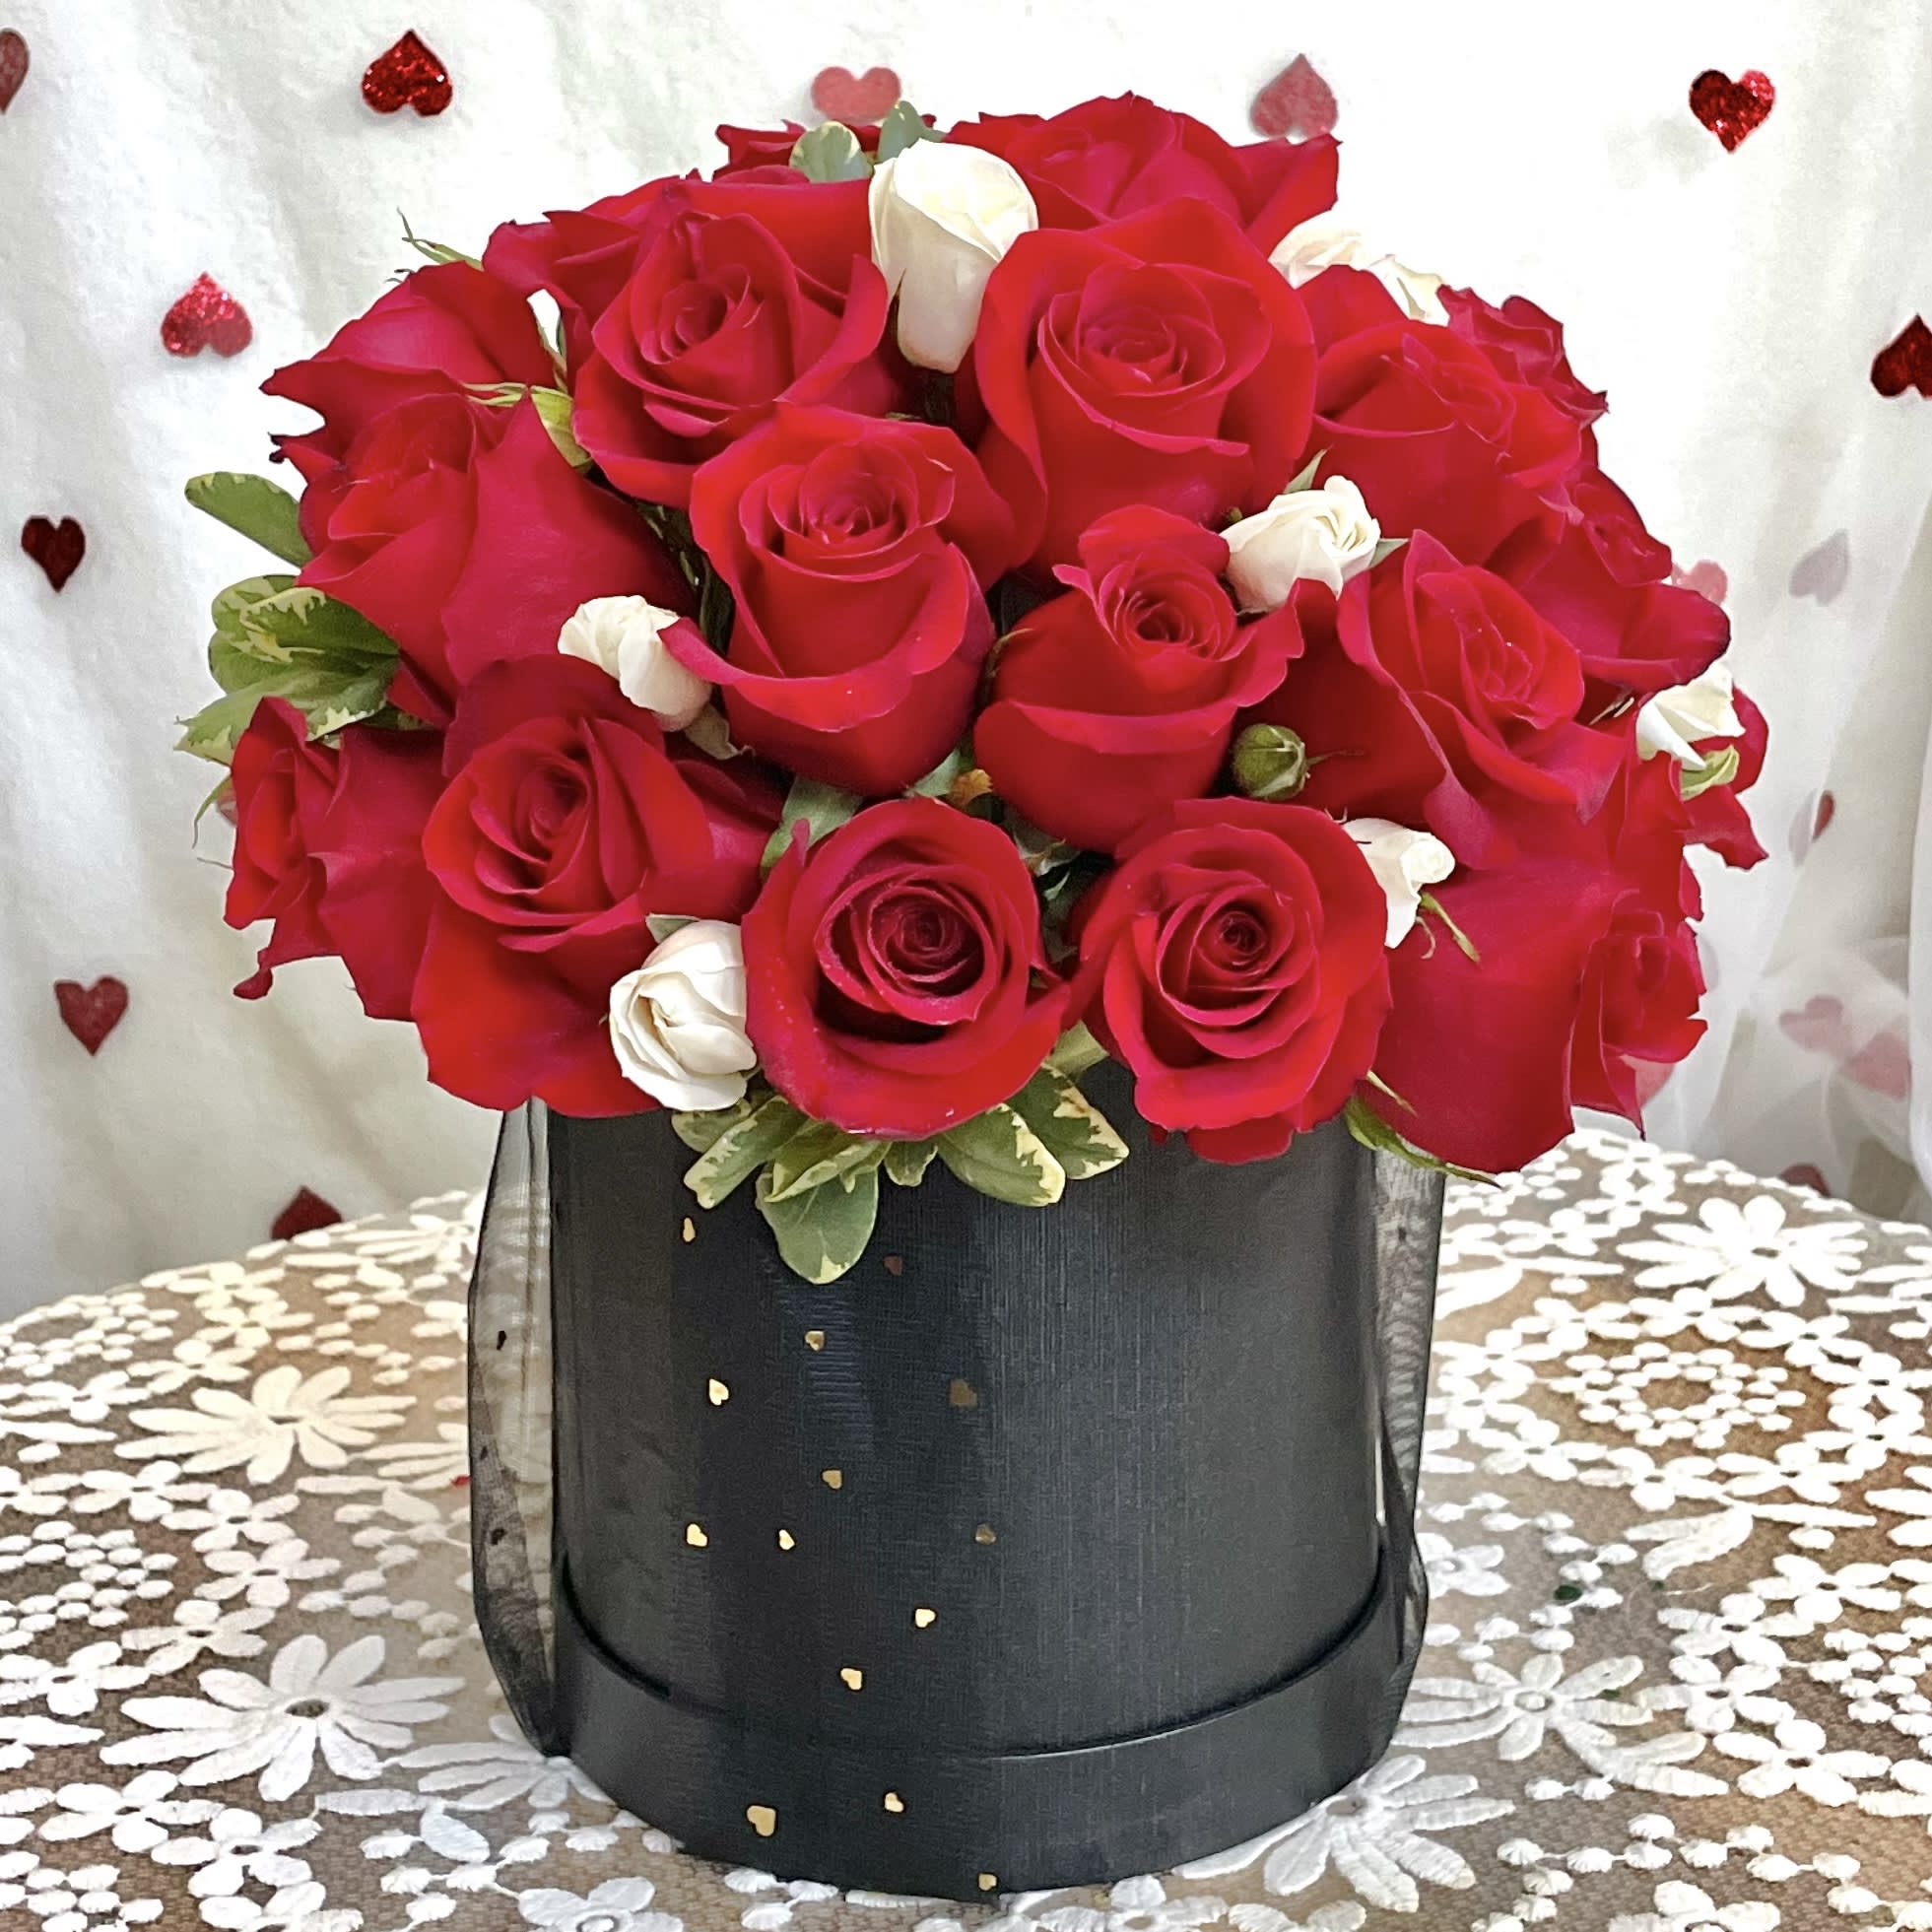 Rose Amore Hat Box - Over two and a half dozen red roses dotted with delicate white baby roses fill an elegant and reusable hat box-style container. Yes, a very romantic gift— that’s amore!